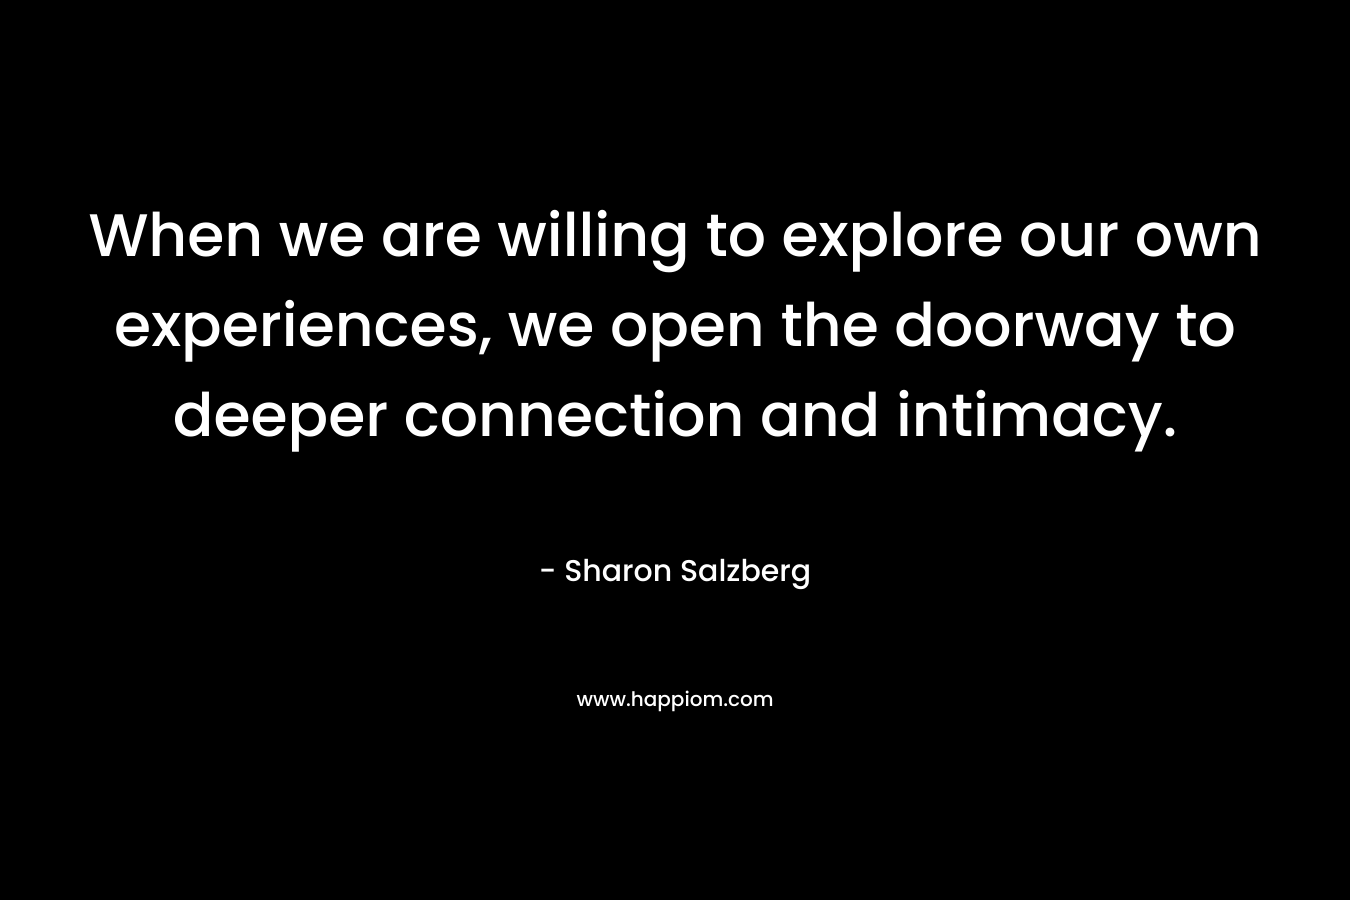 When we are willing to explore our own experiences, we open the doorway to deeper connection and intimacy.